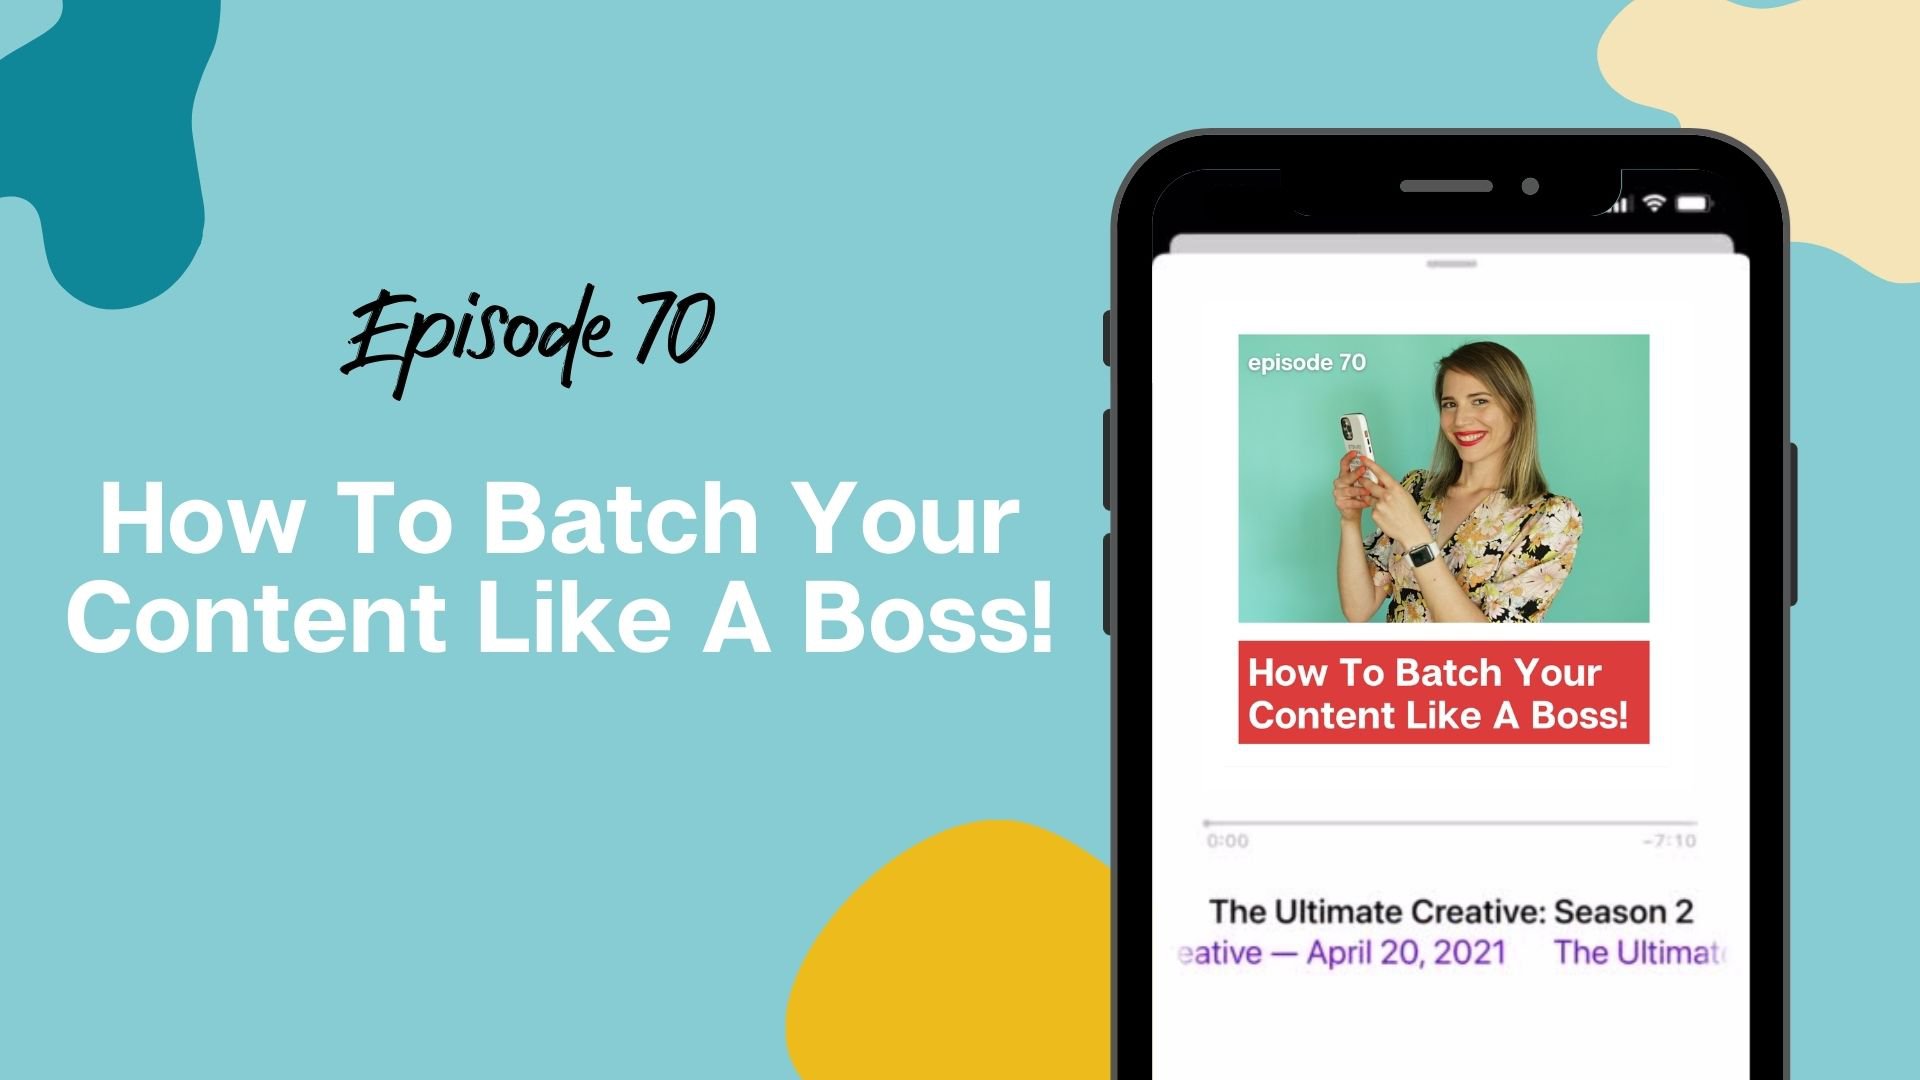 Batching Your Content Like A Boss!